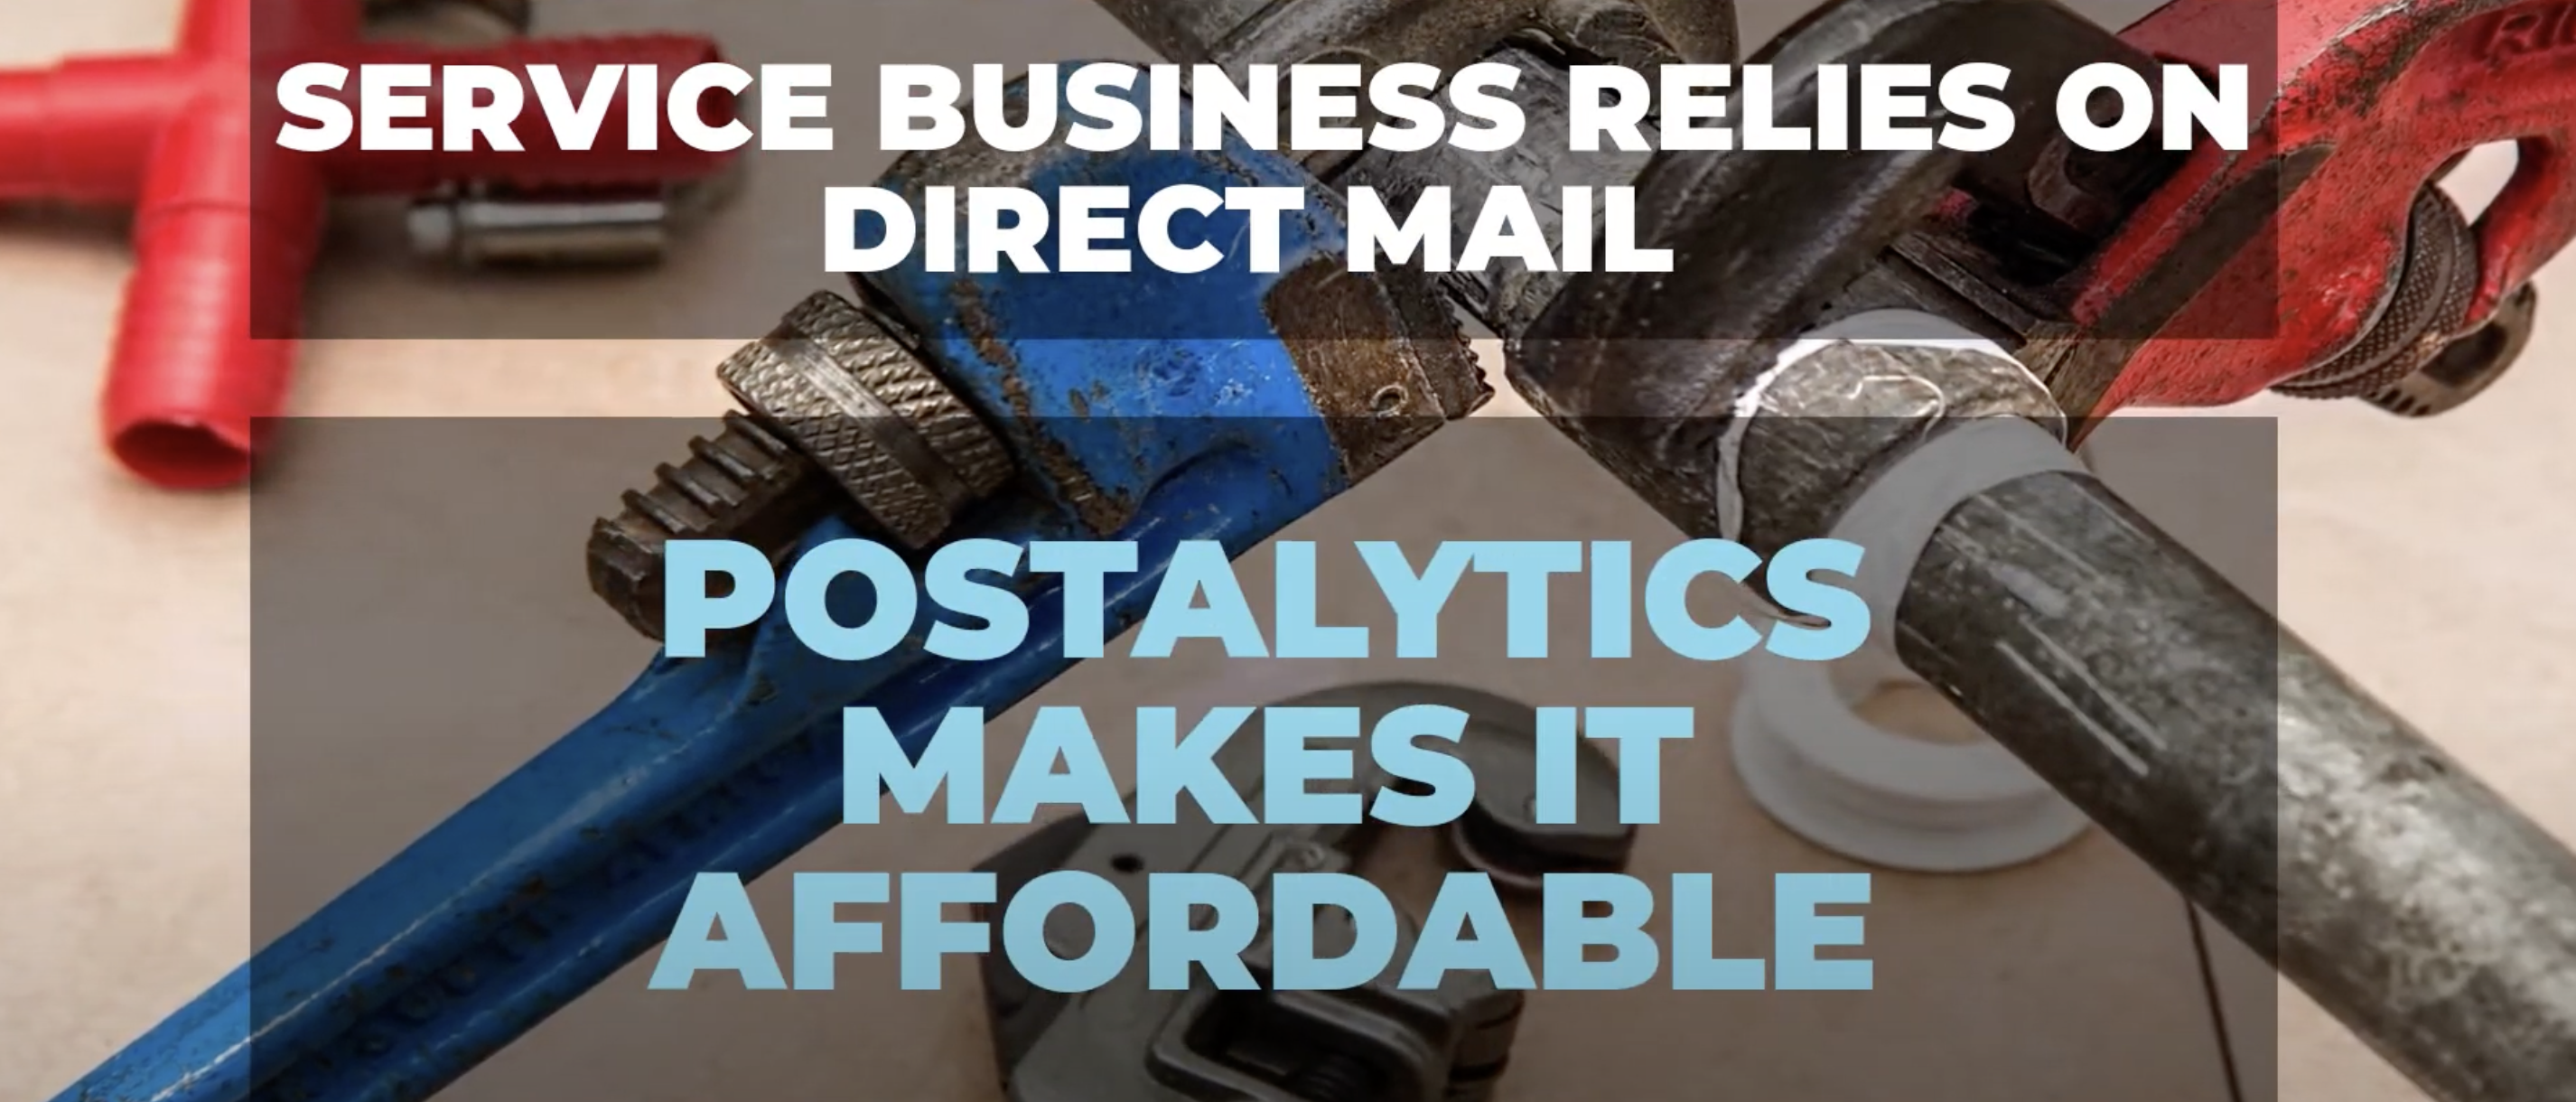 Find out how Postalytics customers outperform their competition with direct mail